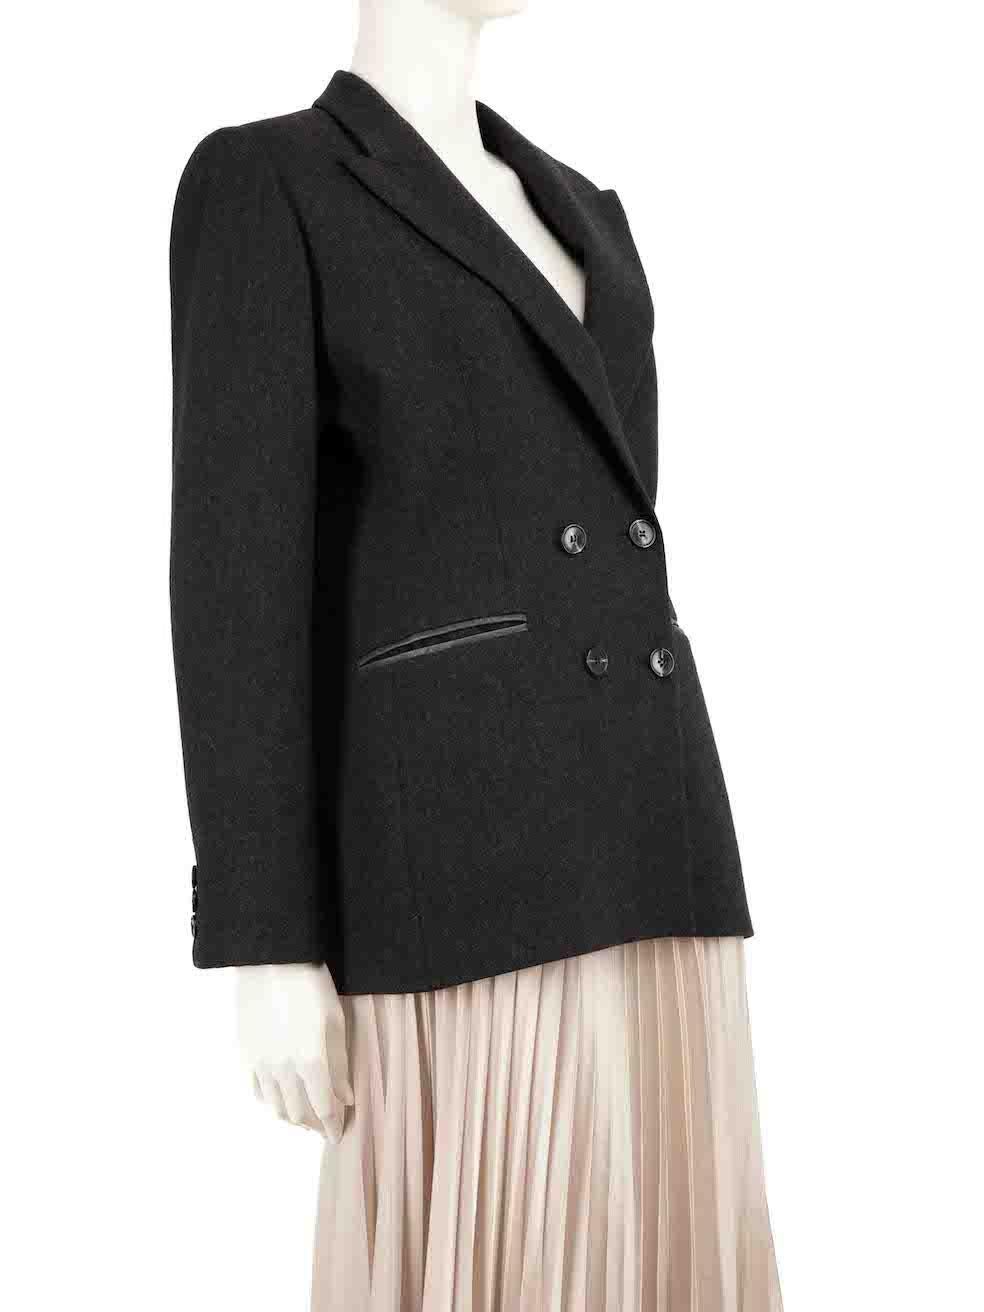 CONDITION is Very good. Minimal wear to the blazer is evident. Minimal discolouration to the pocket leather and the top rear and chest lining. The size and composition label is missing on this used Yves Saint Laurent designer resale item.
 
 
 
